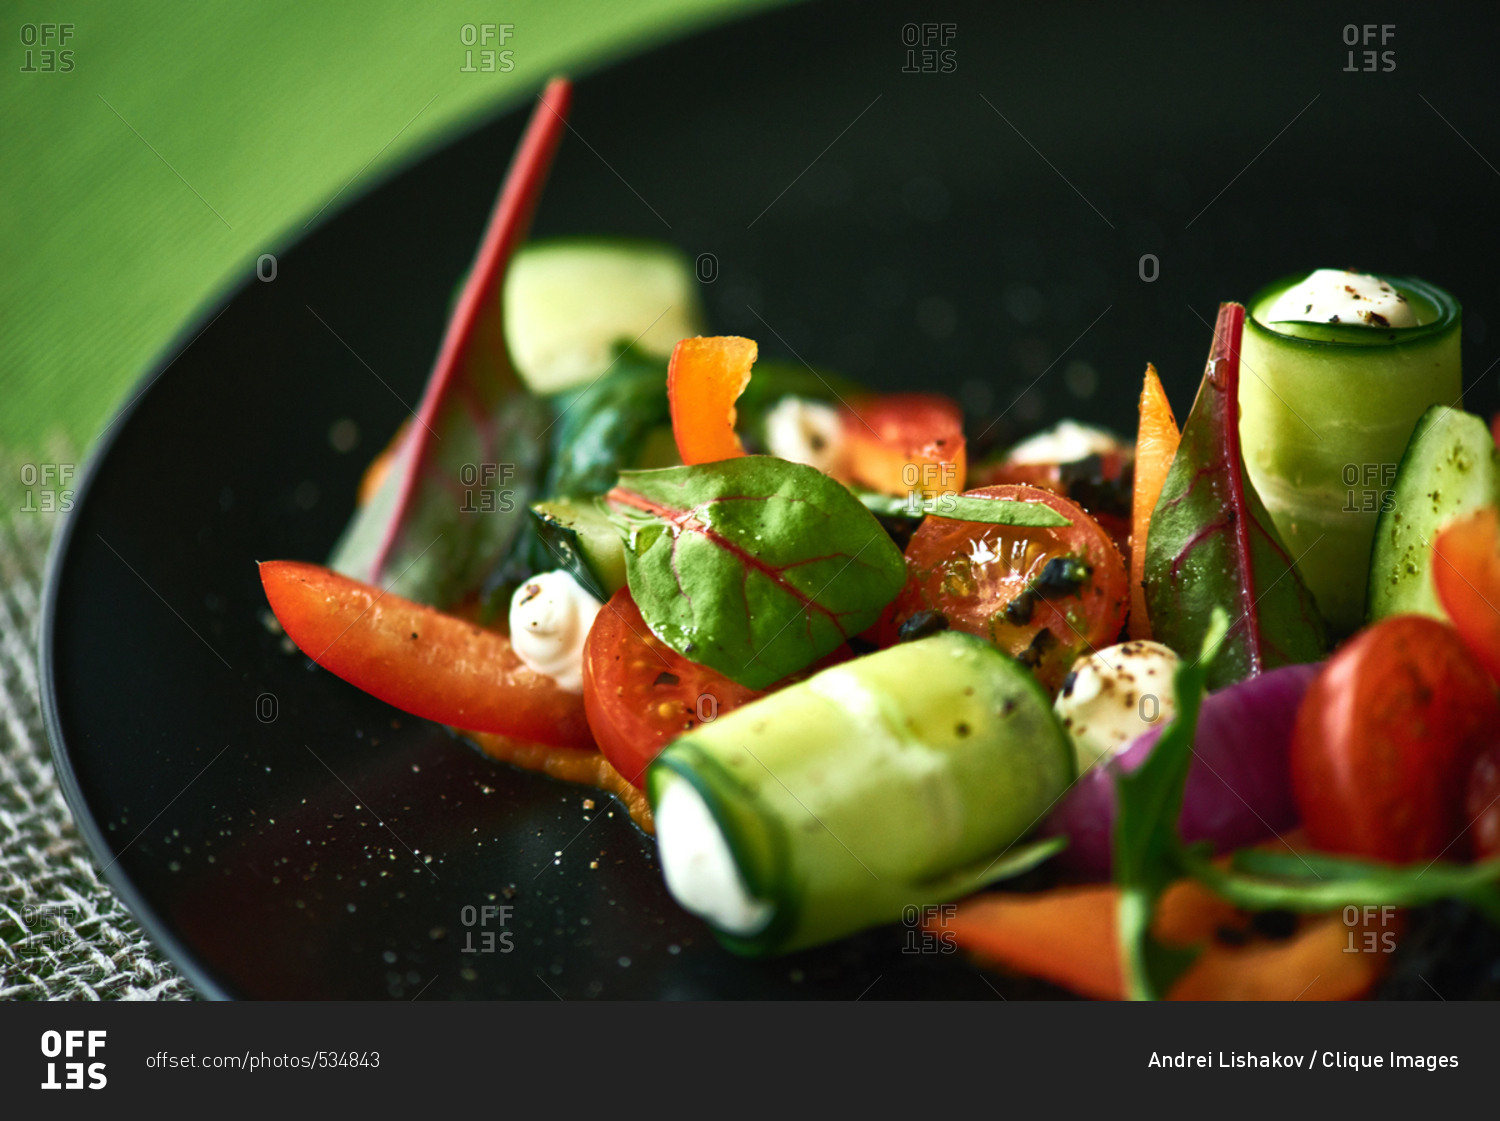 Dish from chef. Extreme close-up shot of delicious vegetable salad with cucumber and cheese rolls, cherry tomatoes, chard leaves served on black plate